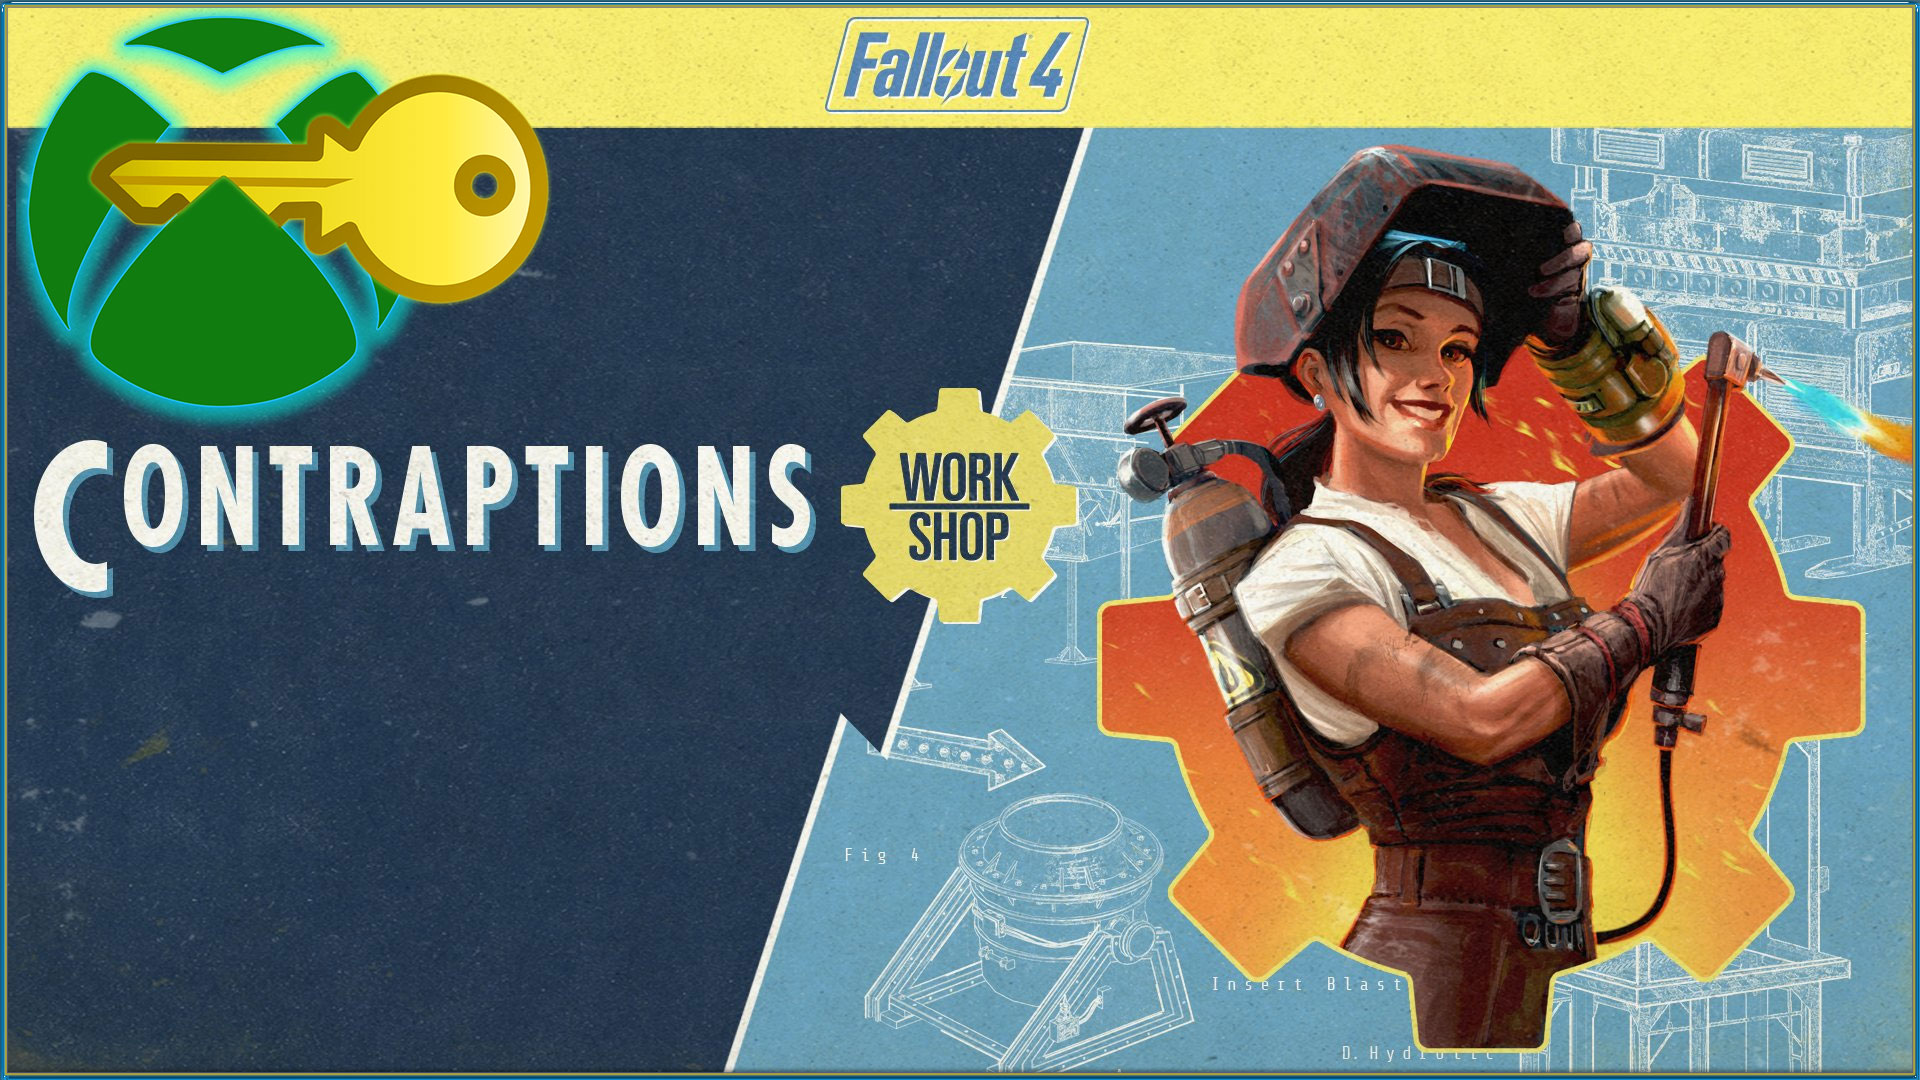 Fallout 4 contraptions workshop nuka world фото 7